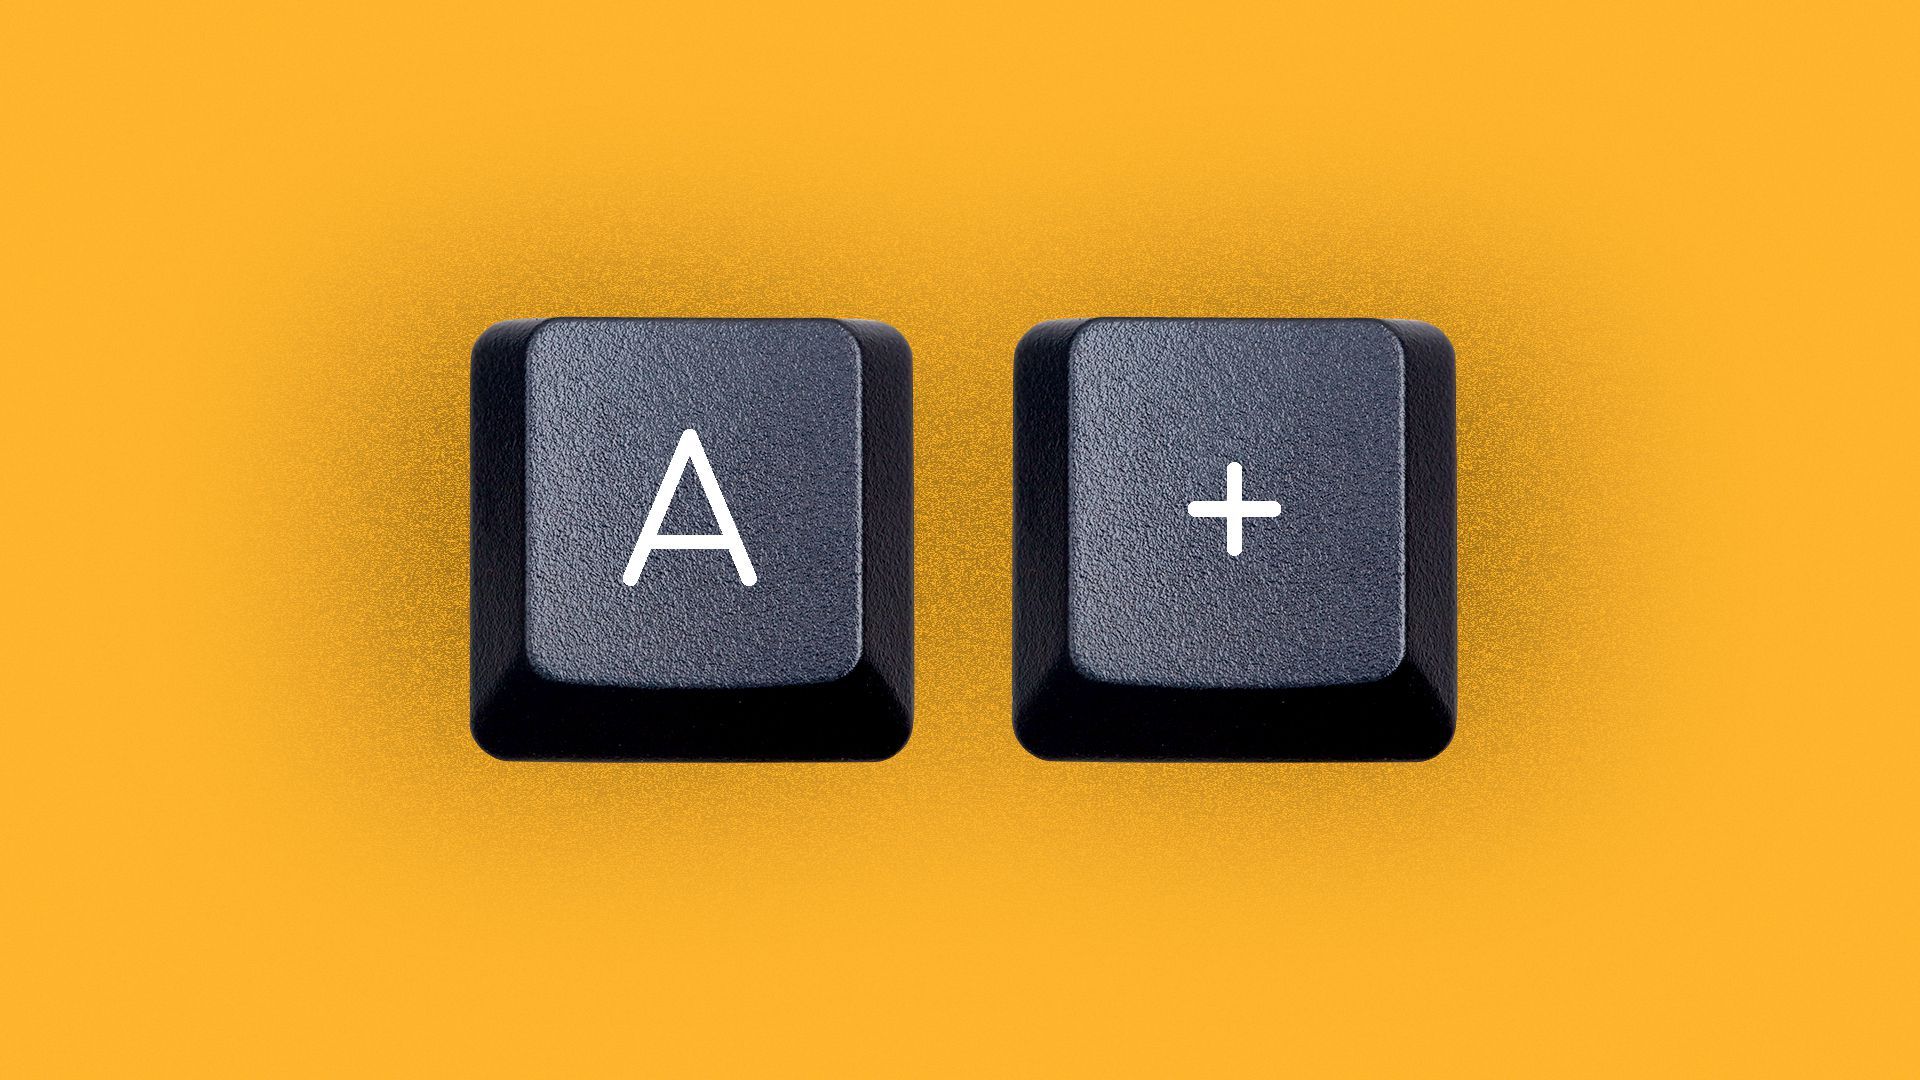 Illustration of computer keys spelling out "A+"